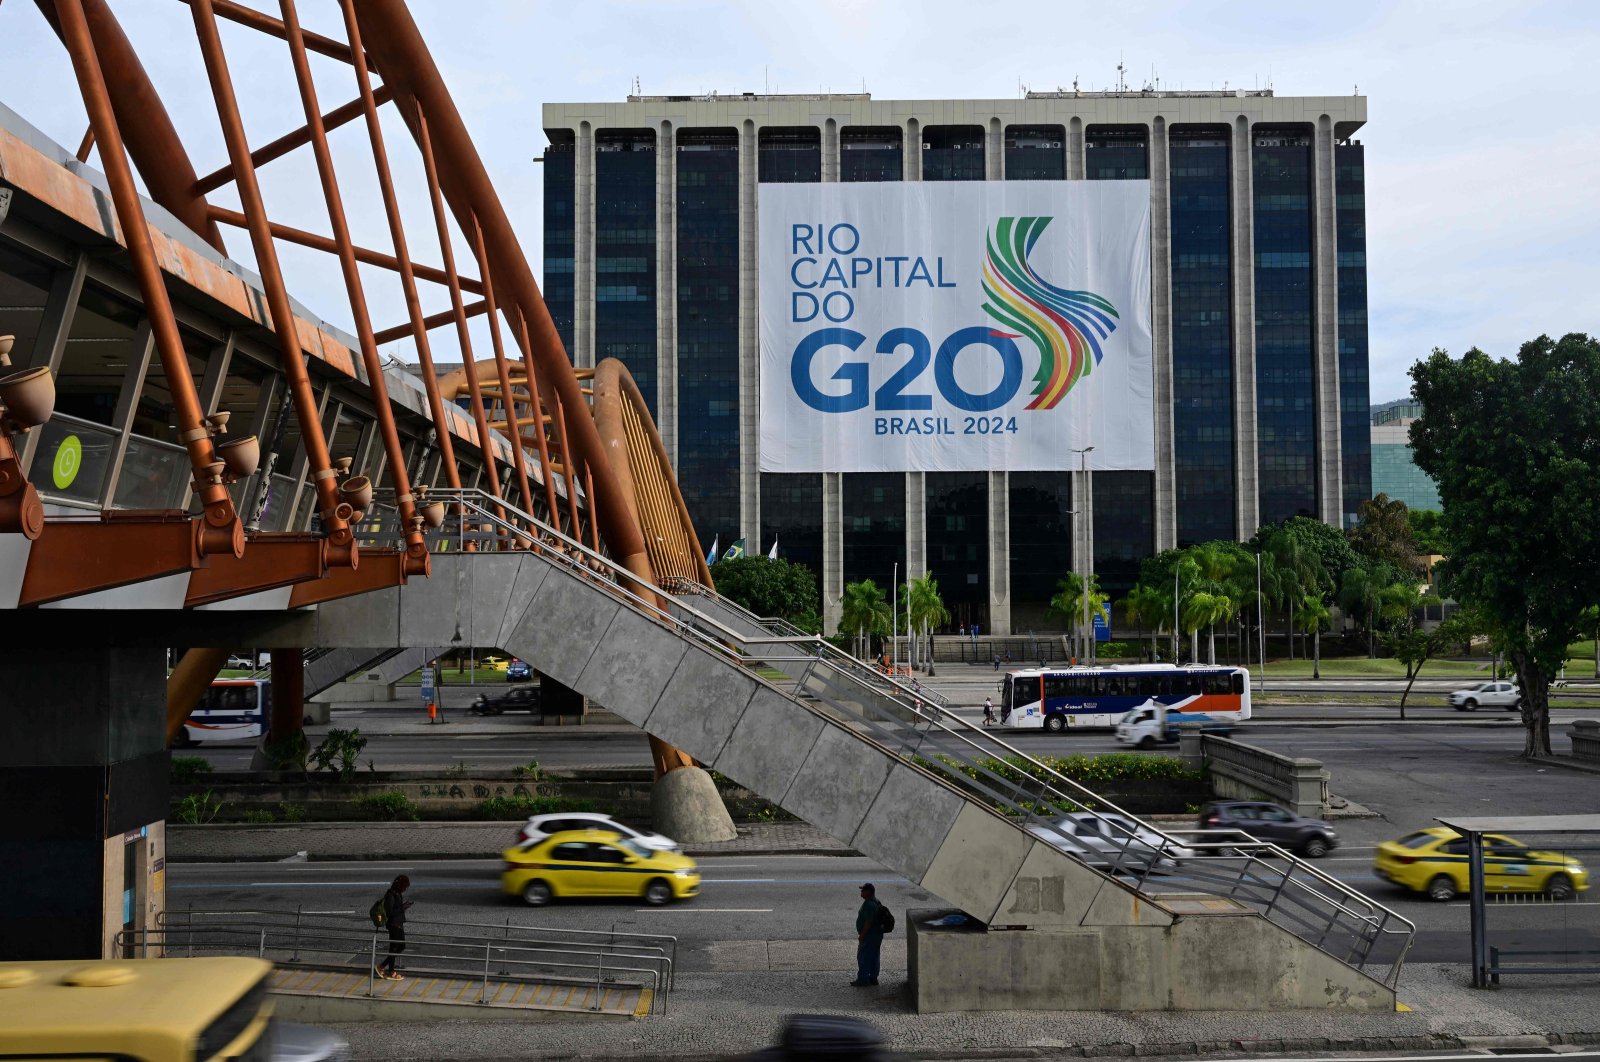 A G-20 Brazil banner is displayed at the city hall, in Rio de Janeiro, Brazil, Feb. 15, 2024. (AFP Photo)